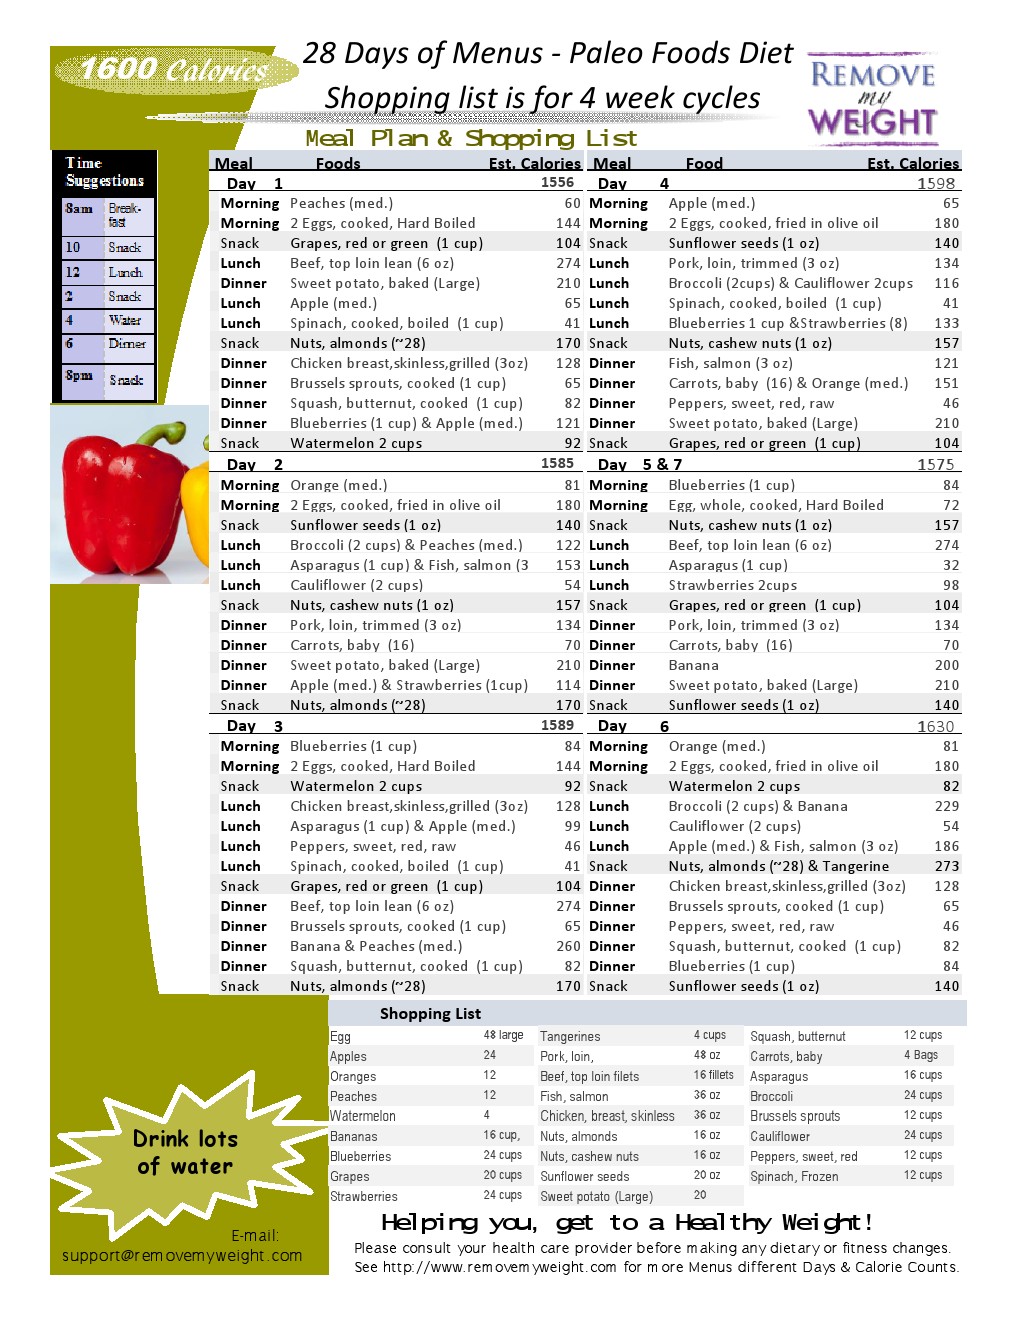 paleo-diet-30-day-1600-calories-a-day-meal-plan-to-lose-weight-menu-plan-for-weight-loss